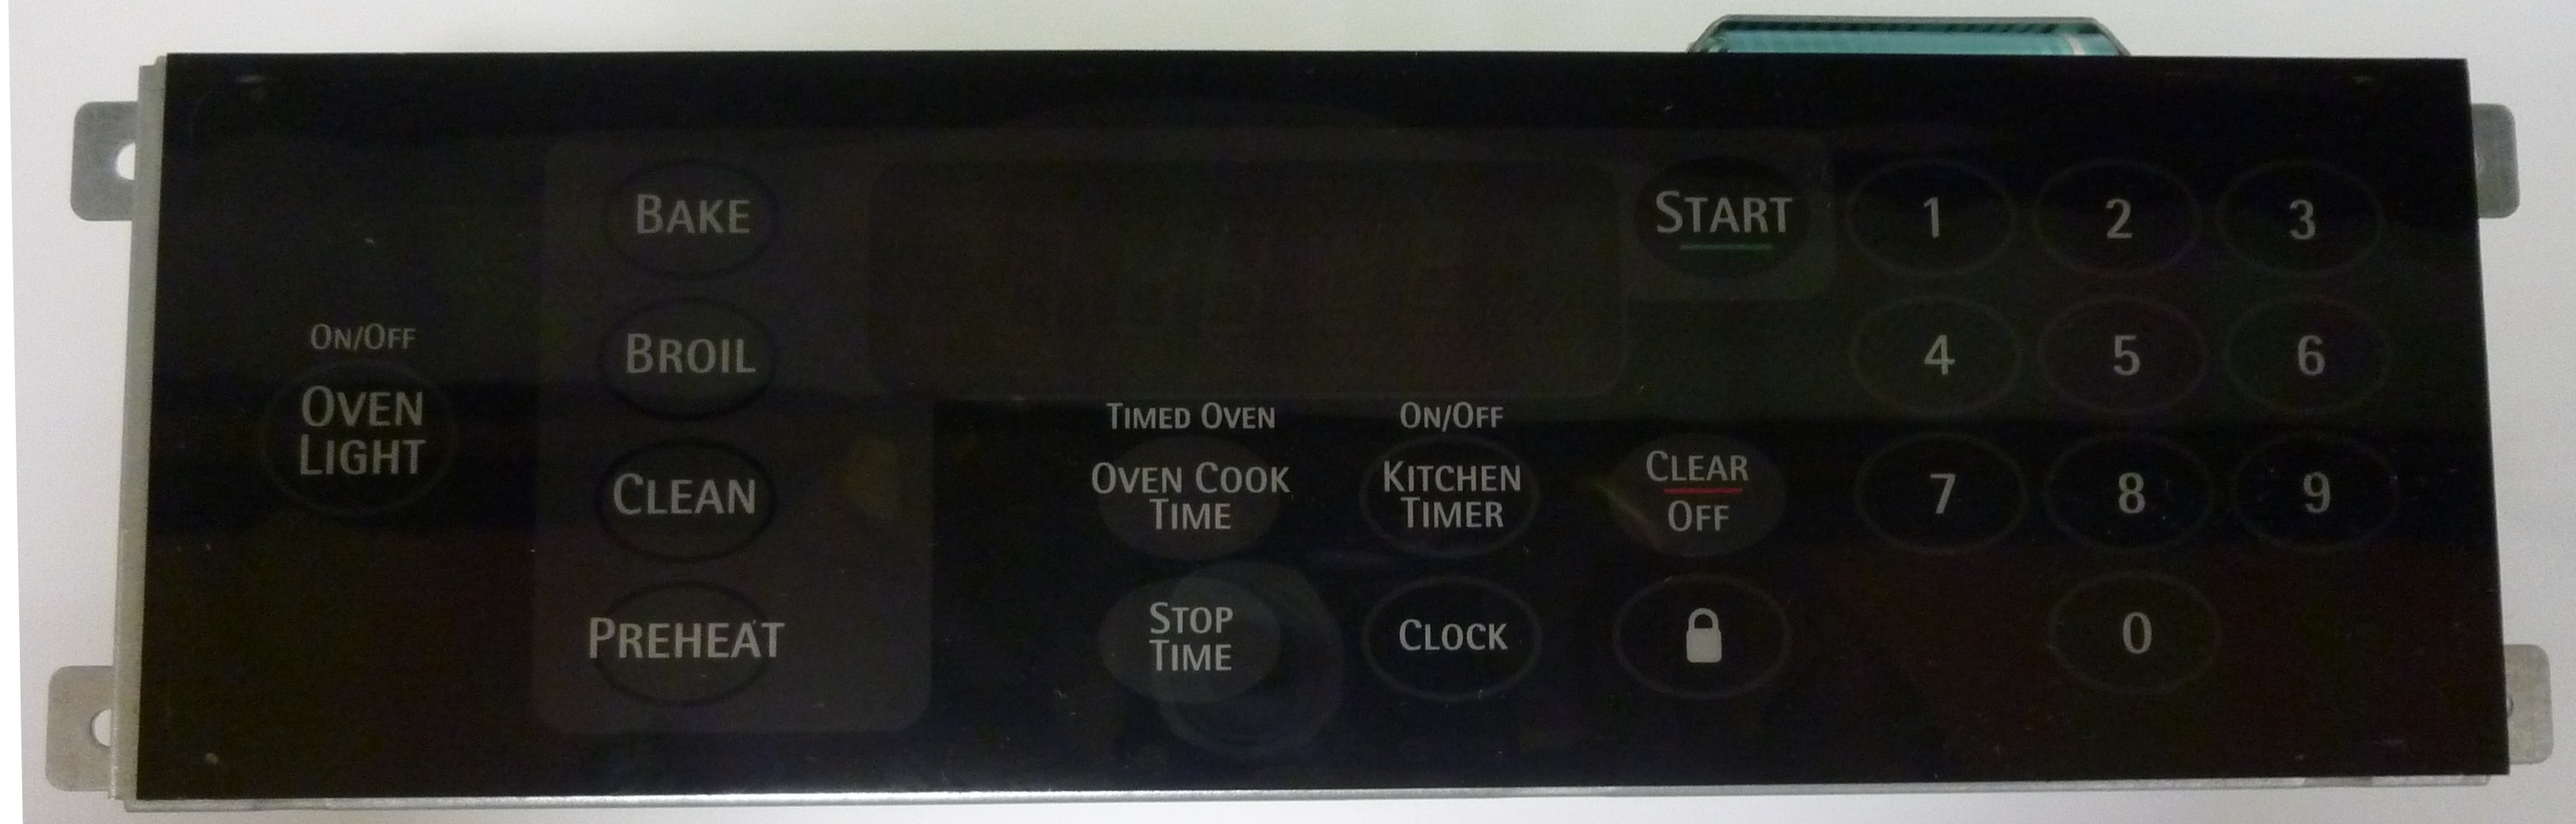 Repair Service For Whirlpool Oven Range Control Board 8524255 